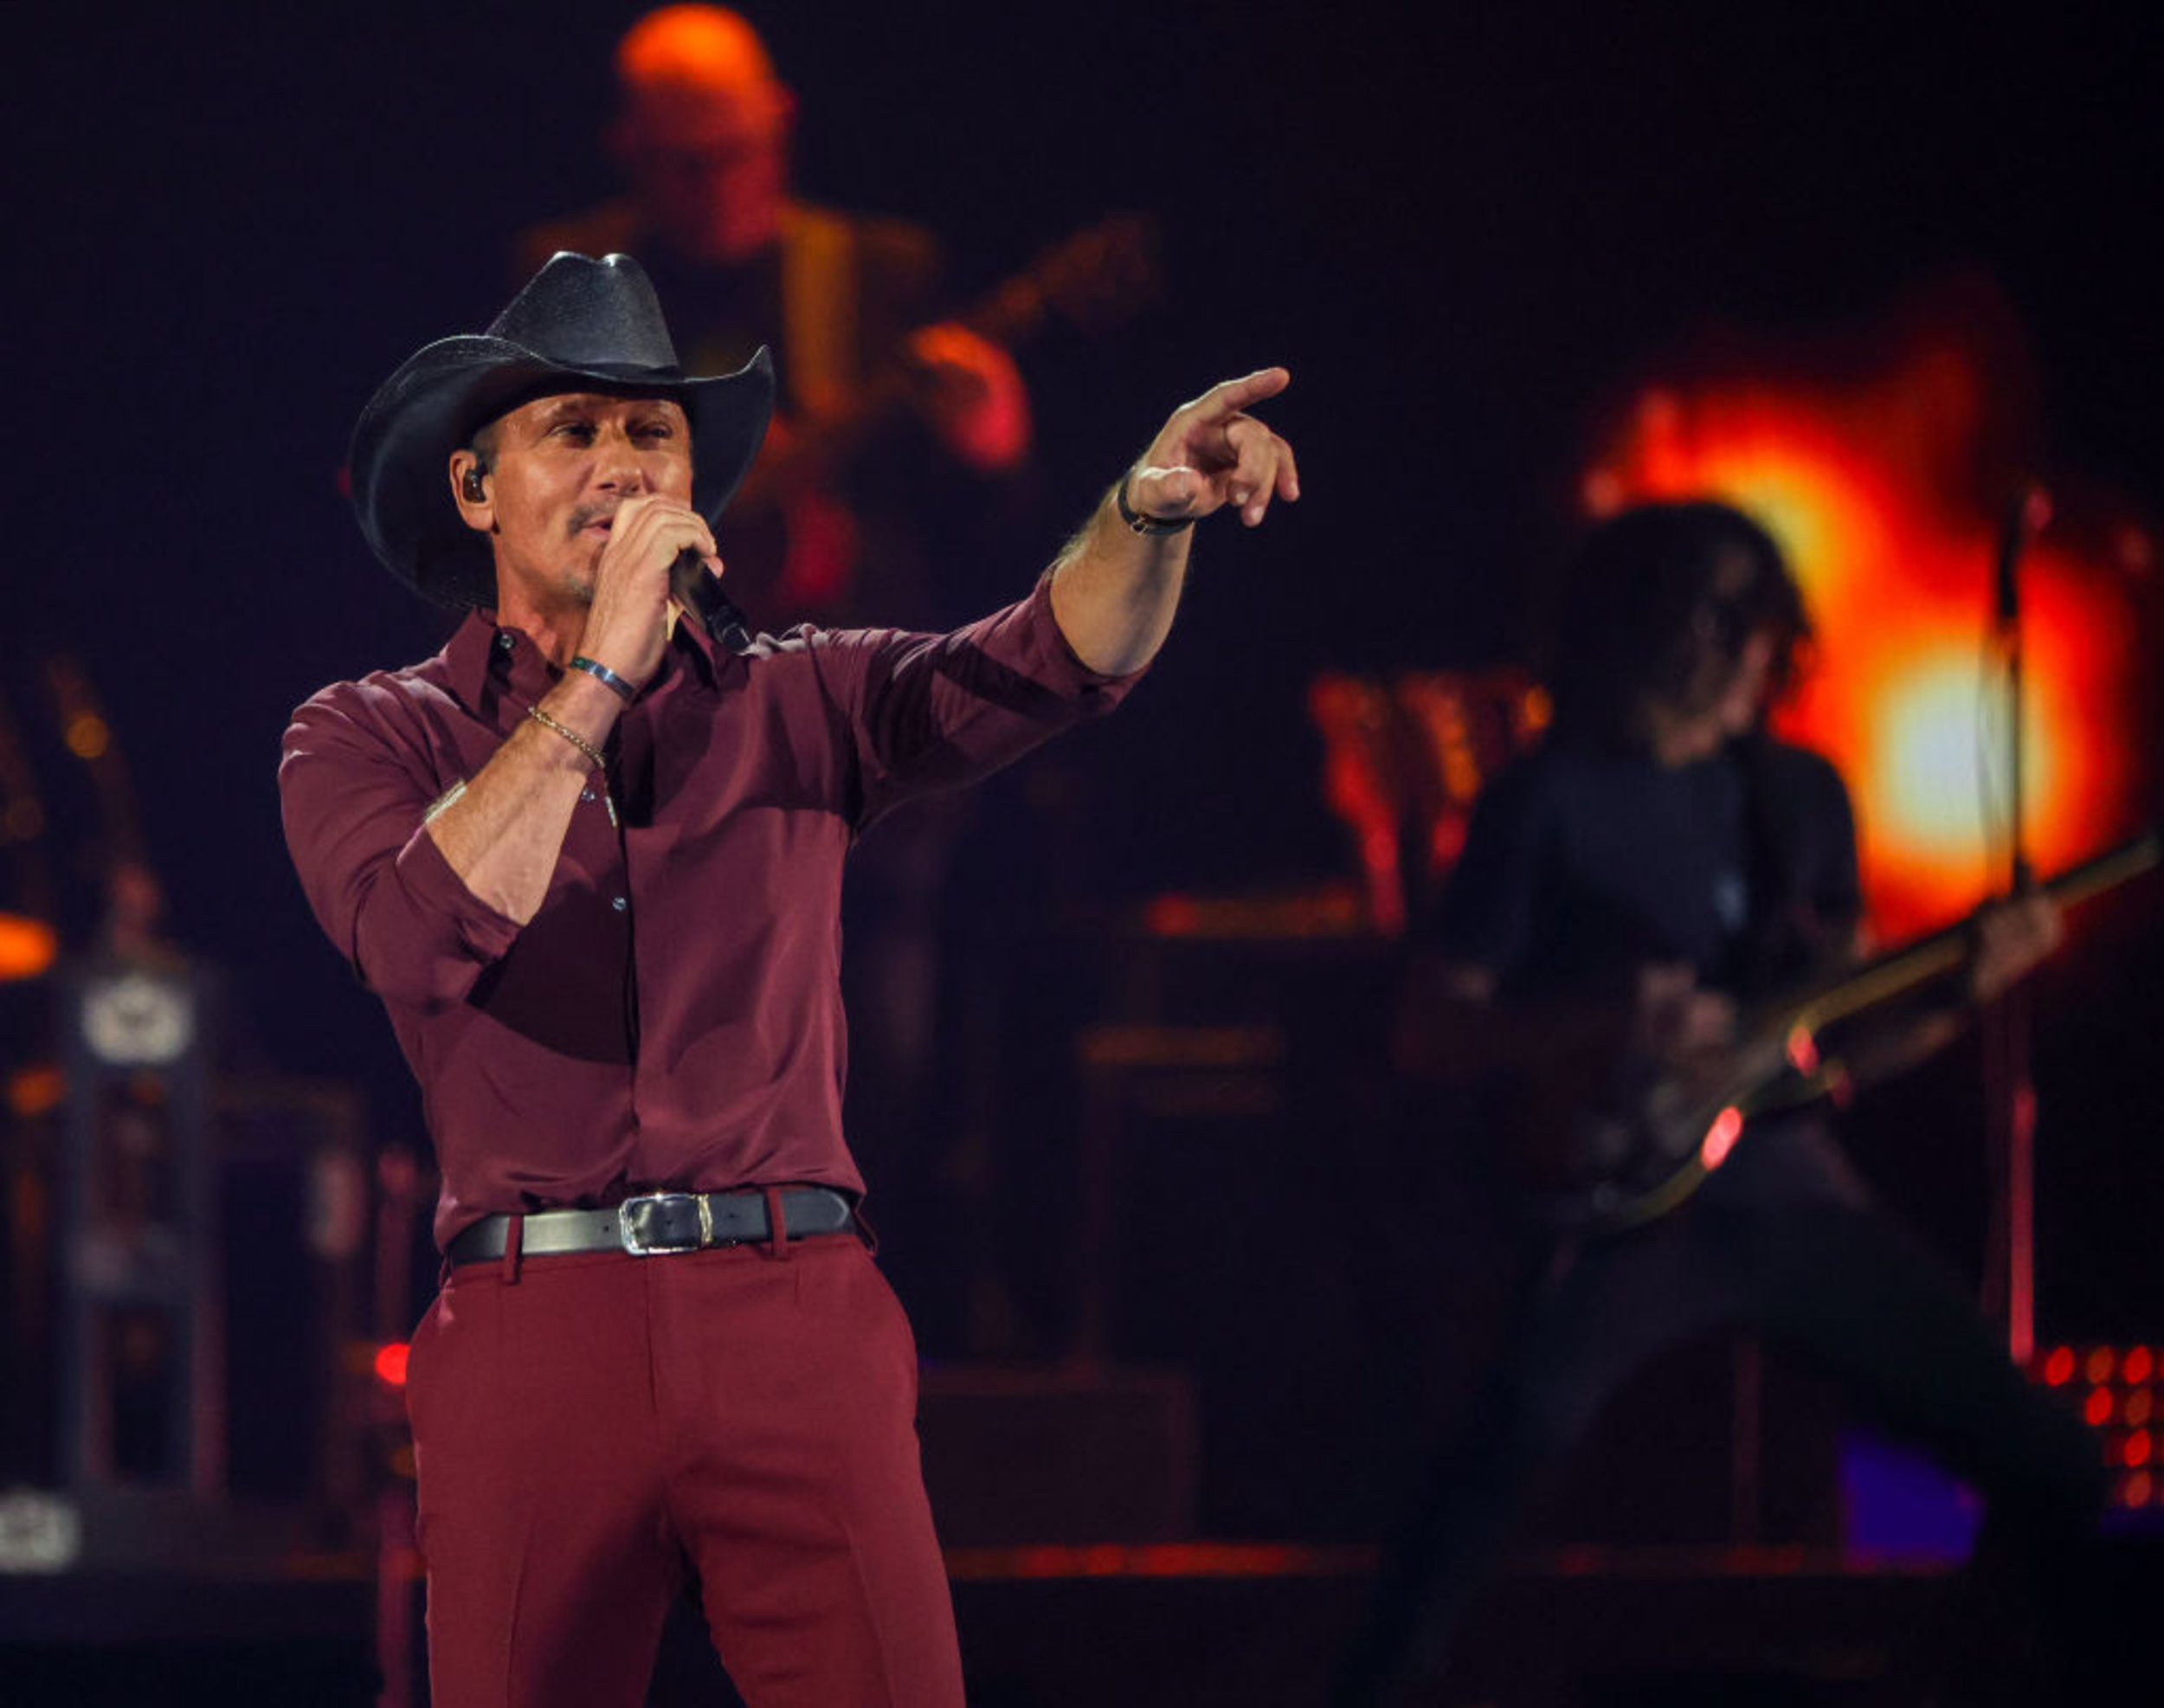 <p>In support of his latest album <em>Standing Room Only,</em> country legend Tim McGraw is bringing his talent to the stage. The three-time Grammy winner’s tour will begin on March 14th in Jacksonville and end on June 27th in Phoenix. </p><p>You may also like: <a href='https://www.yardbarker.com/entertainment/articles/20_best_movies_with_a_character_as_the_chosen_one_033124/s1__39188907'>20 best movies with a character as “The Chosen One”</a></p>